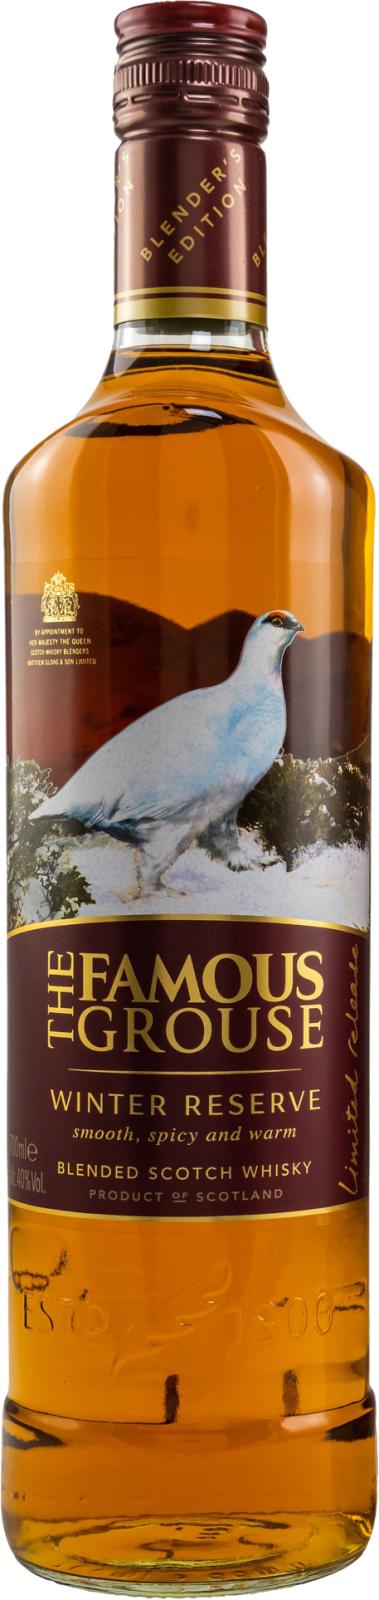 The Famous Grouse Winter Reserve 40% 700ml